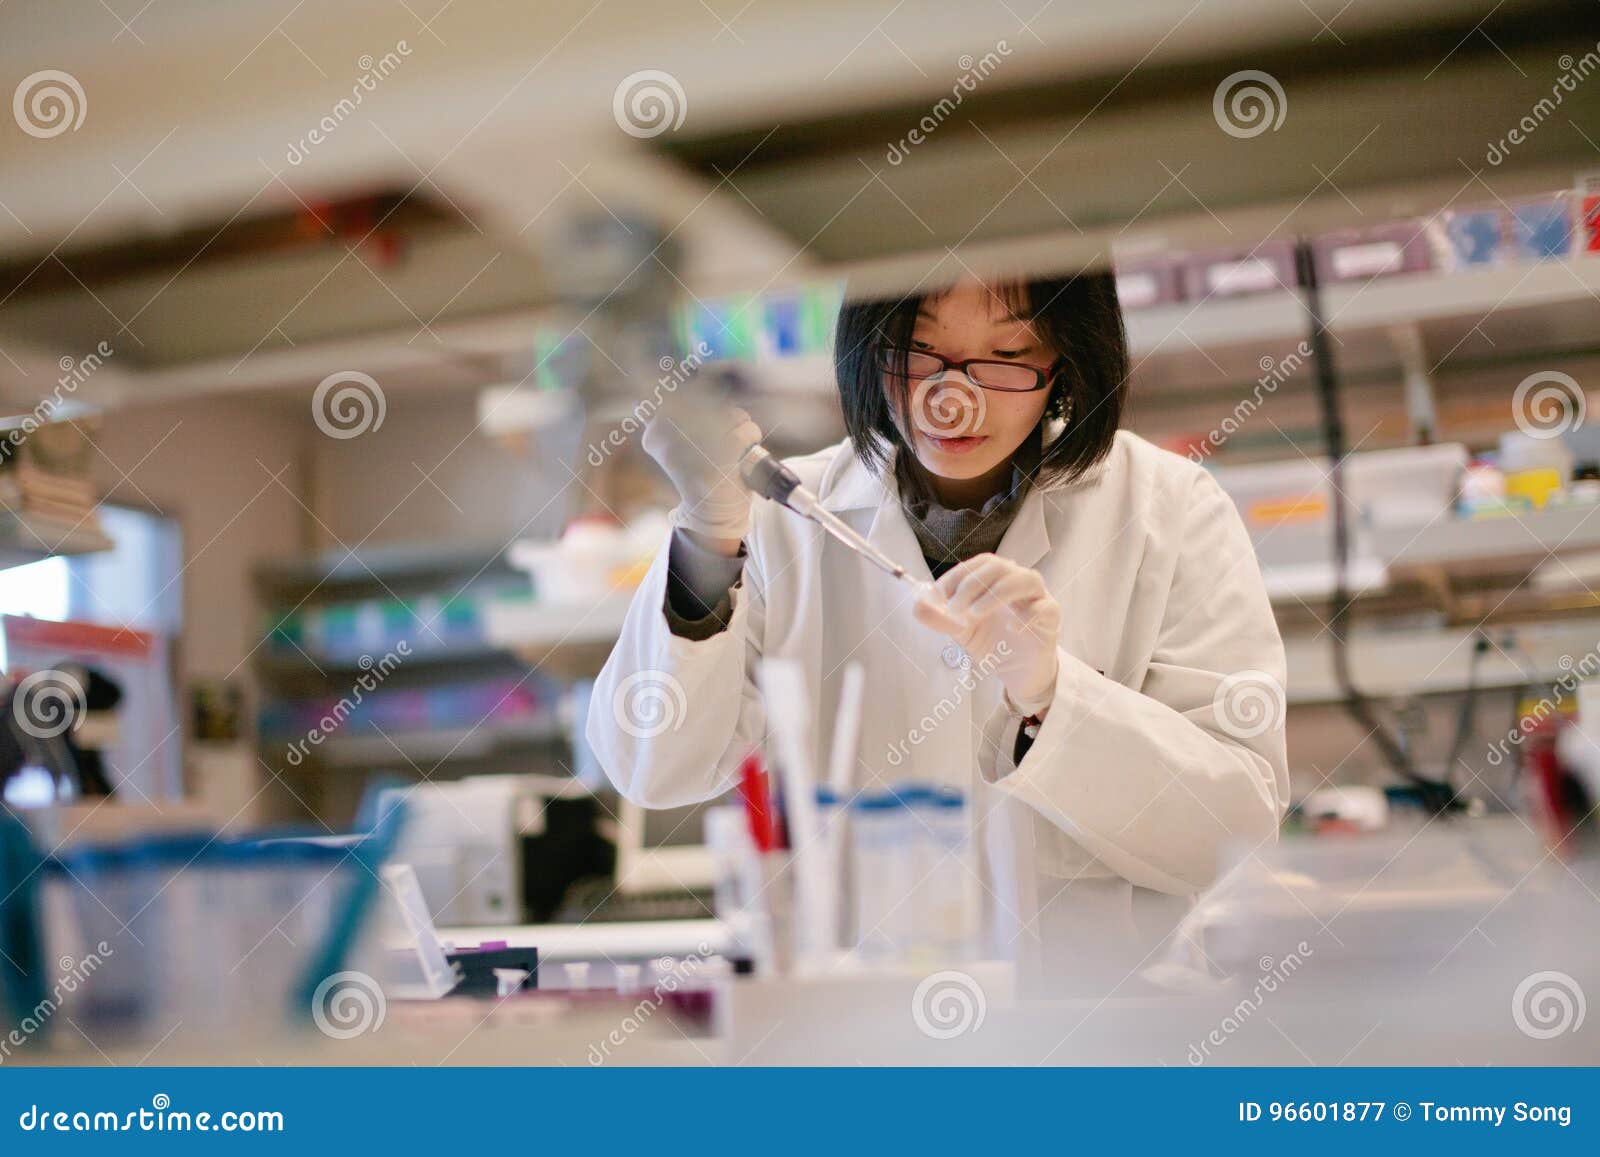 asian scientist pipetting at a biomedical laboratory